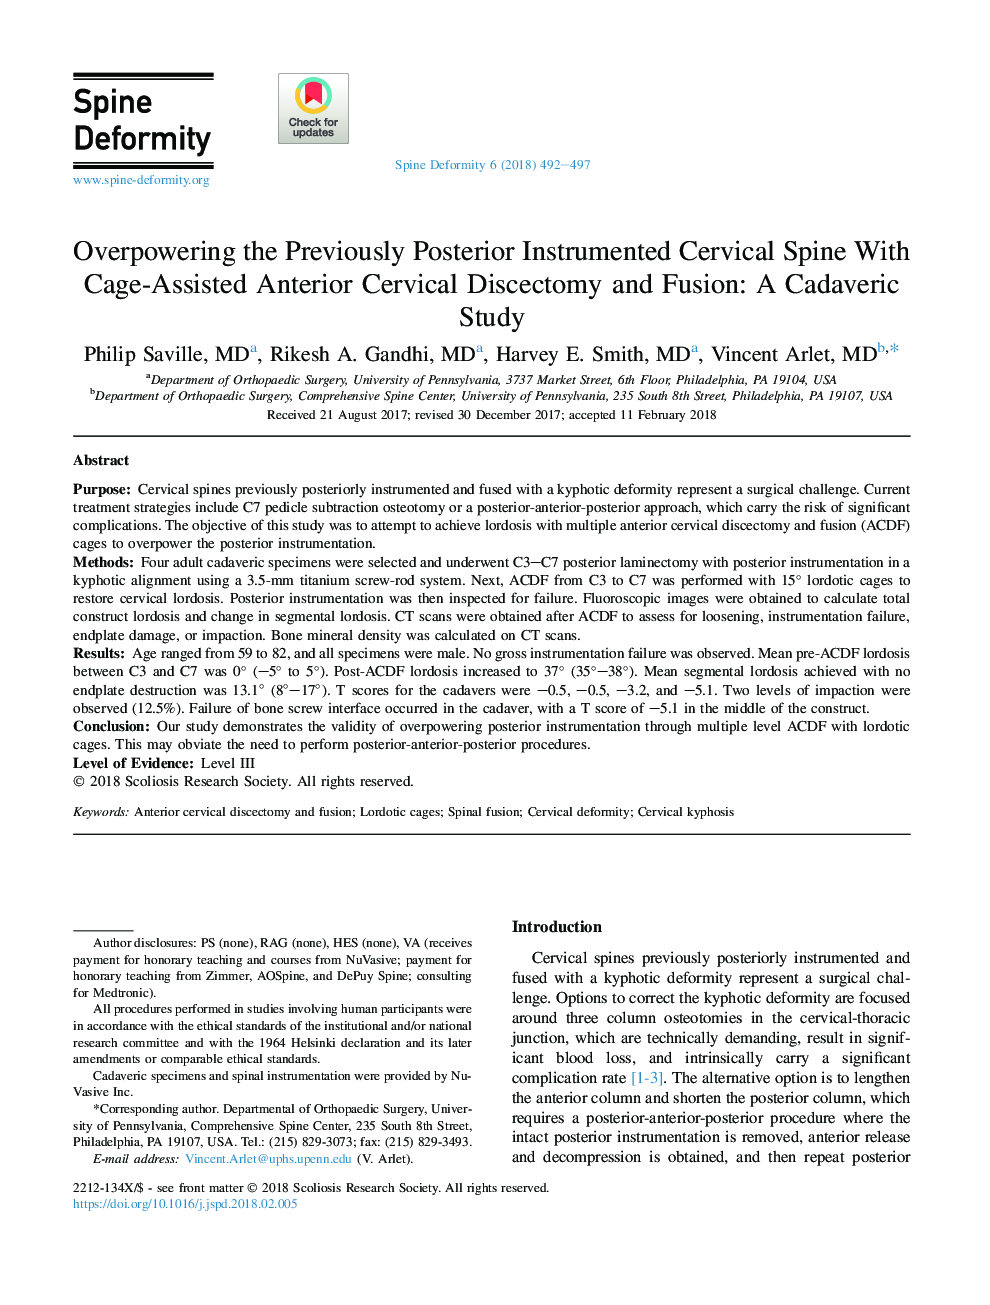 Overpowering the Previously Posterior Instrumented Cervical Spine With Cage-Assisted Anterior Cervical Discectomy and Fusion: A Cadaveric Study